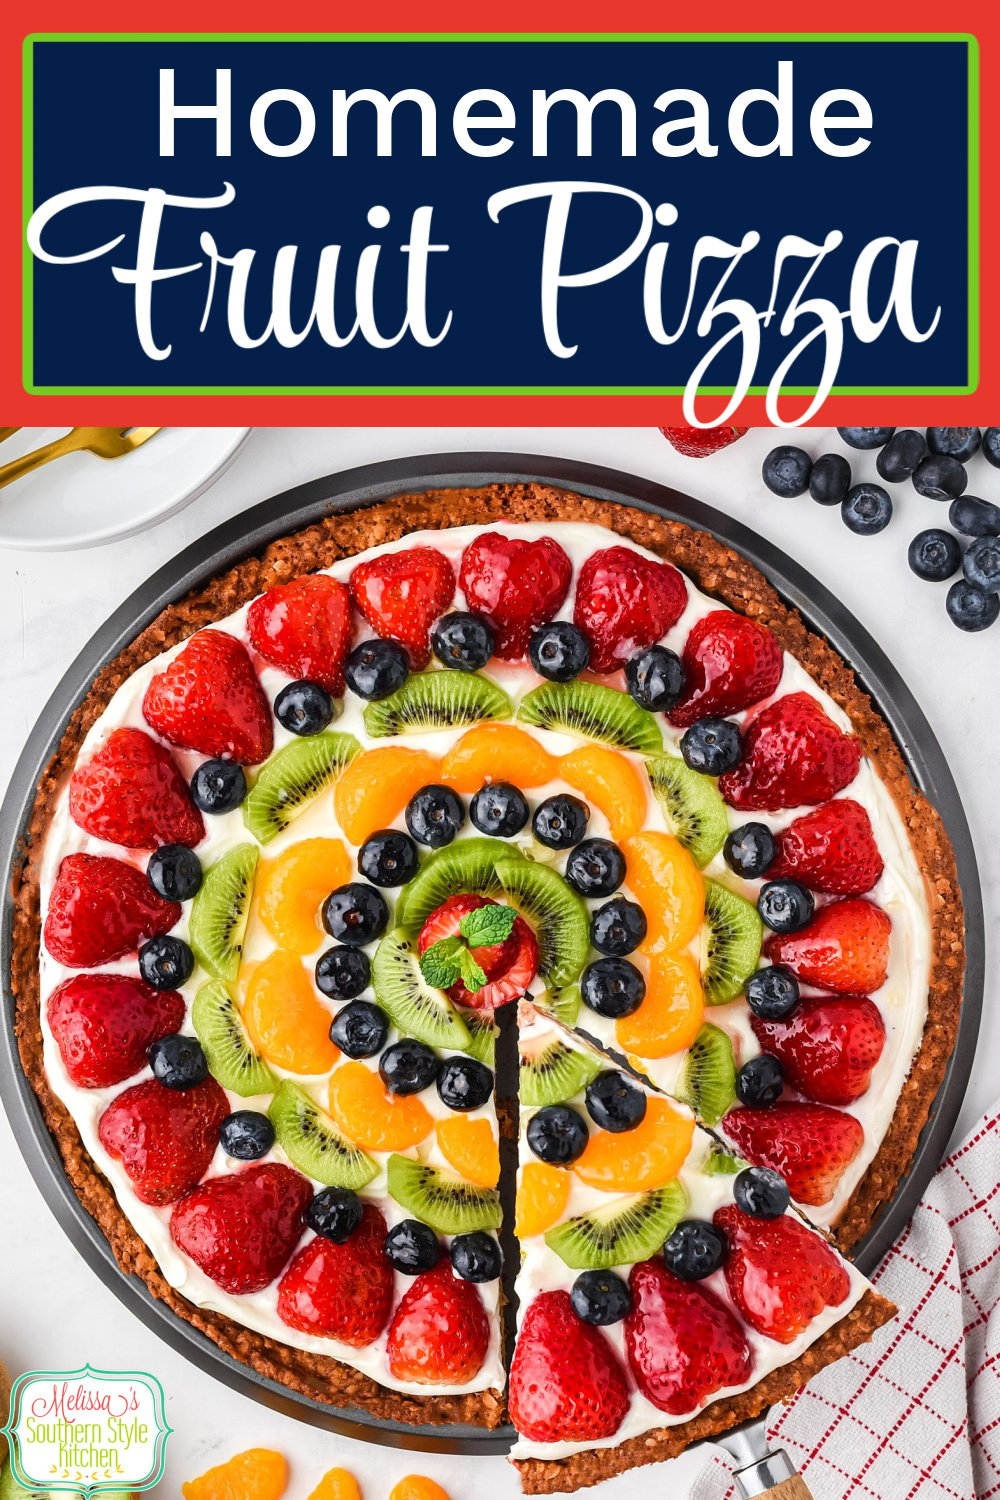 This Fruit Pizza recipe features a homemade cookie crust topped with a variety of colorful fruit and cream cheese filling #fruitpizza #easyfruitpizzarecipe #howtomakefruitpizza #fruitsalad #fruitrecipes #rfruitdessertrecipes via @melissasssk